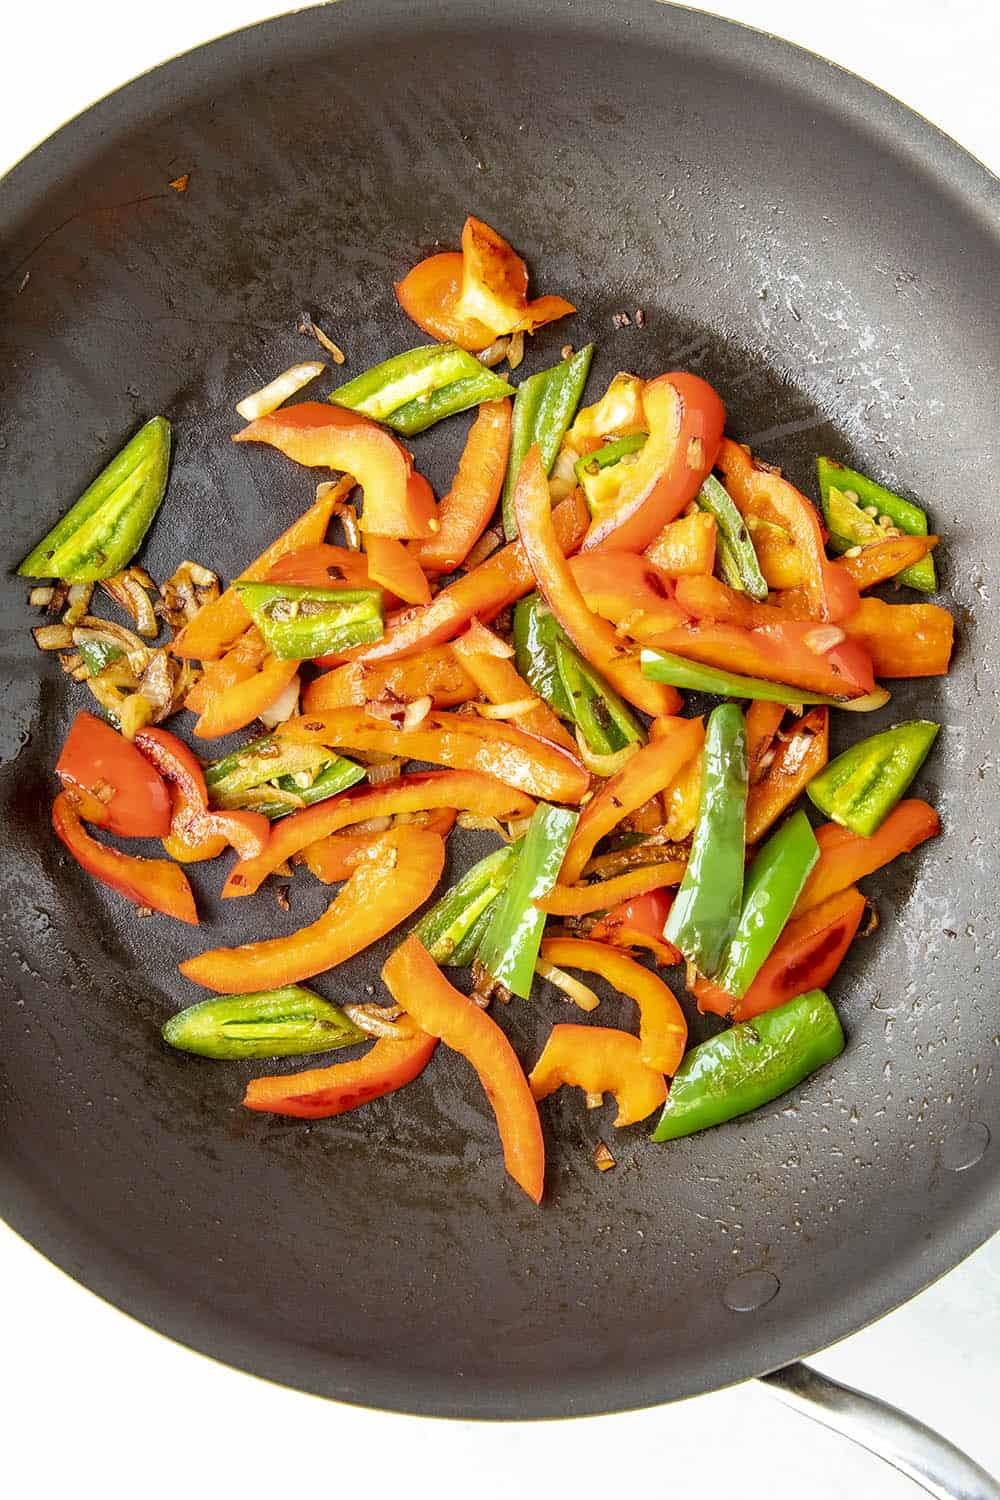 Cooking down peppers for a pepper and egg sandwich